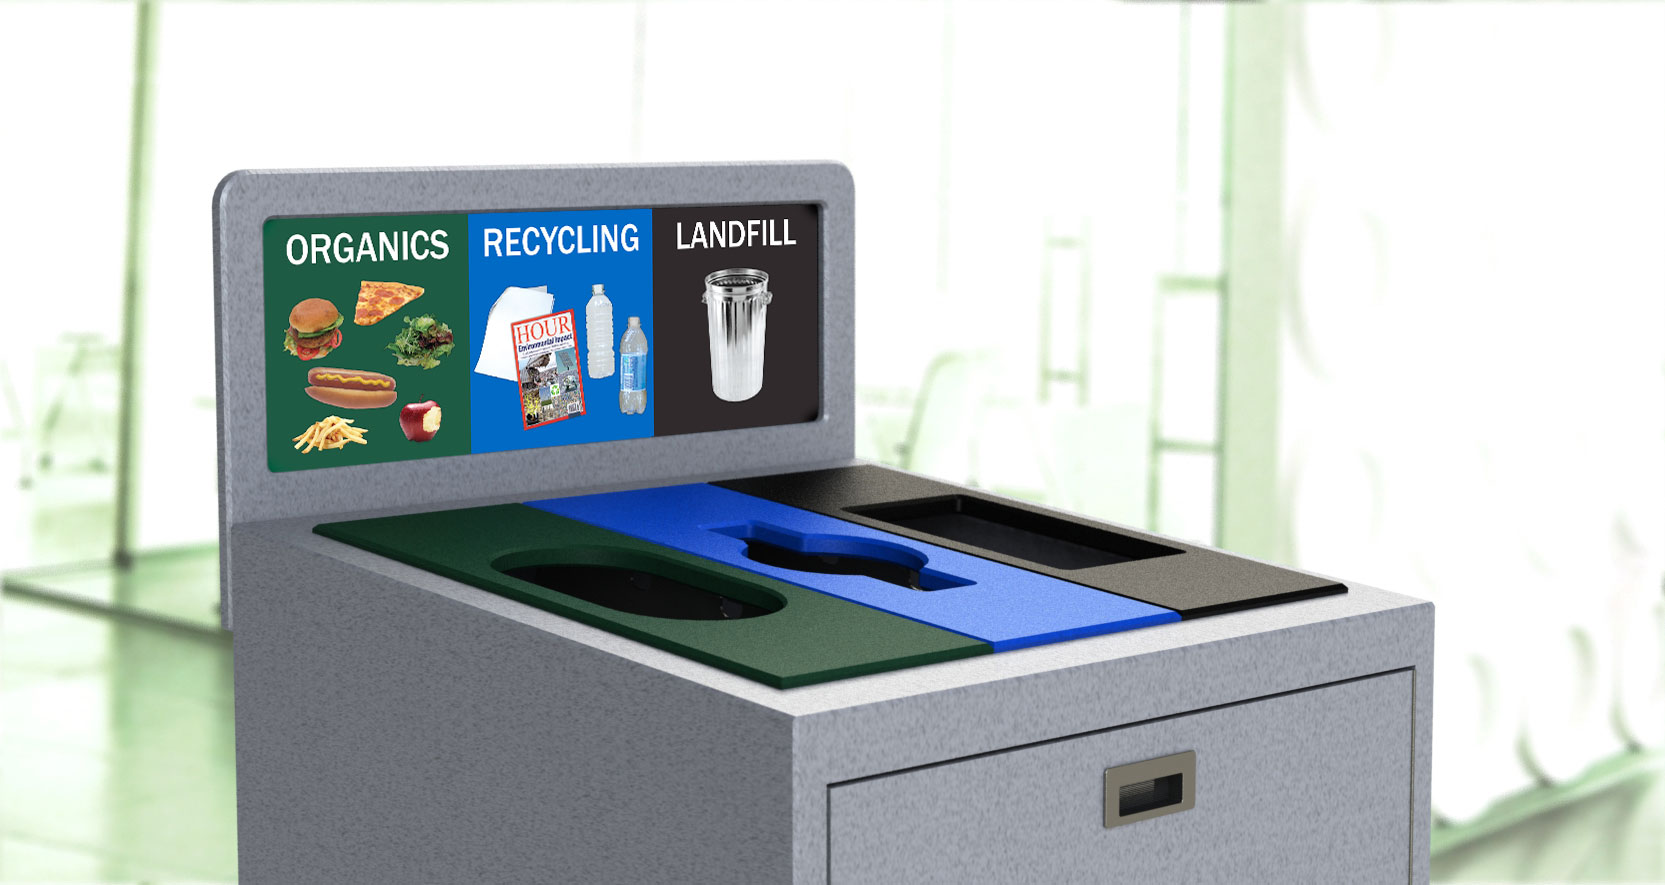 Graphics, Recycling posters, Standardized posters, Organics poster, Compost Bin, Commercial Recycling Bin, Office Recycling